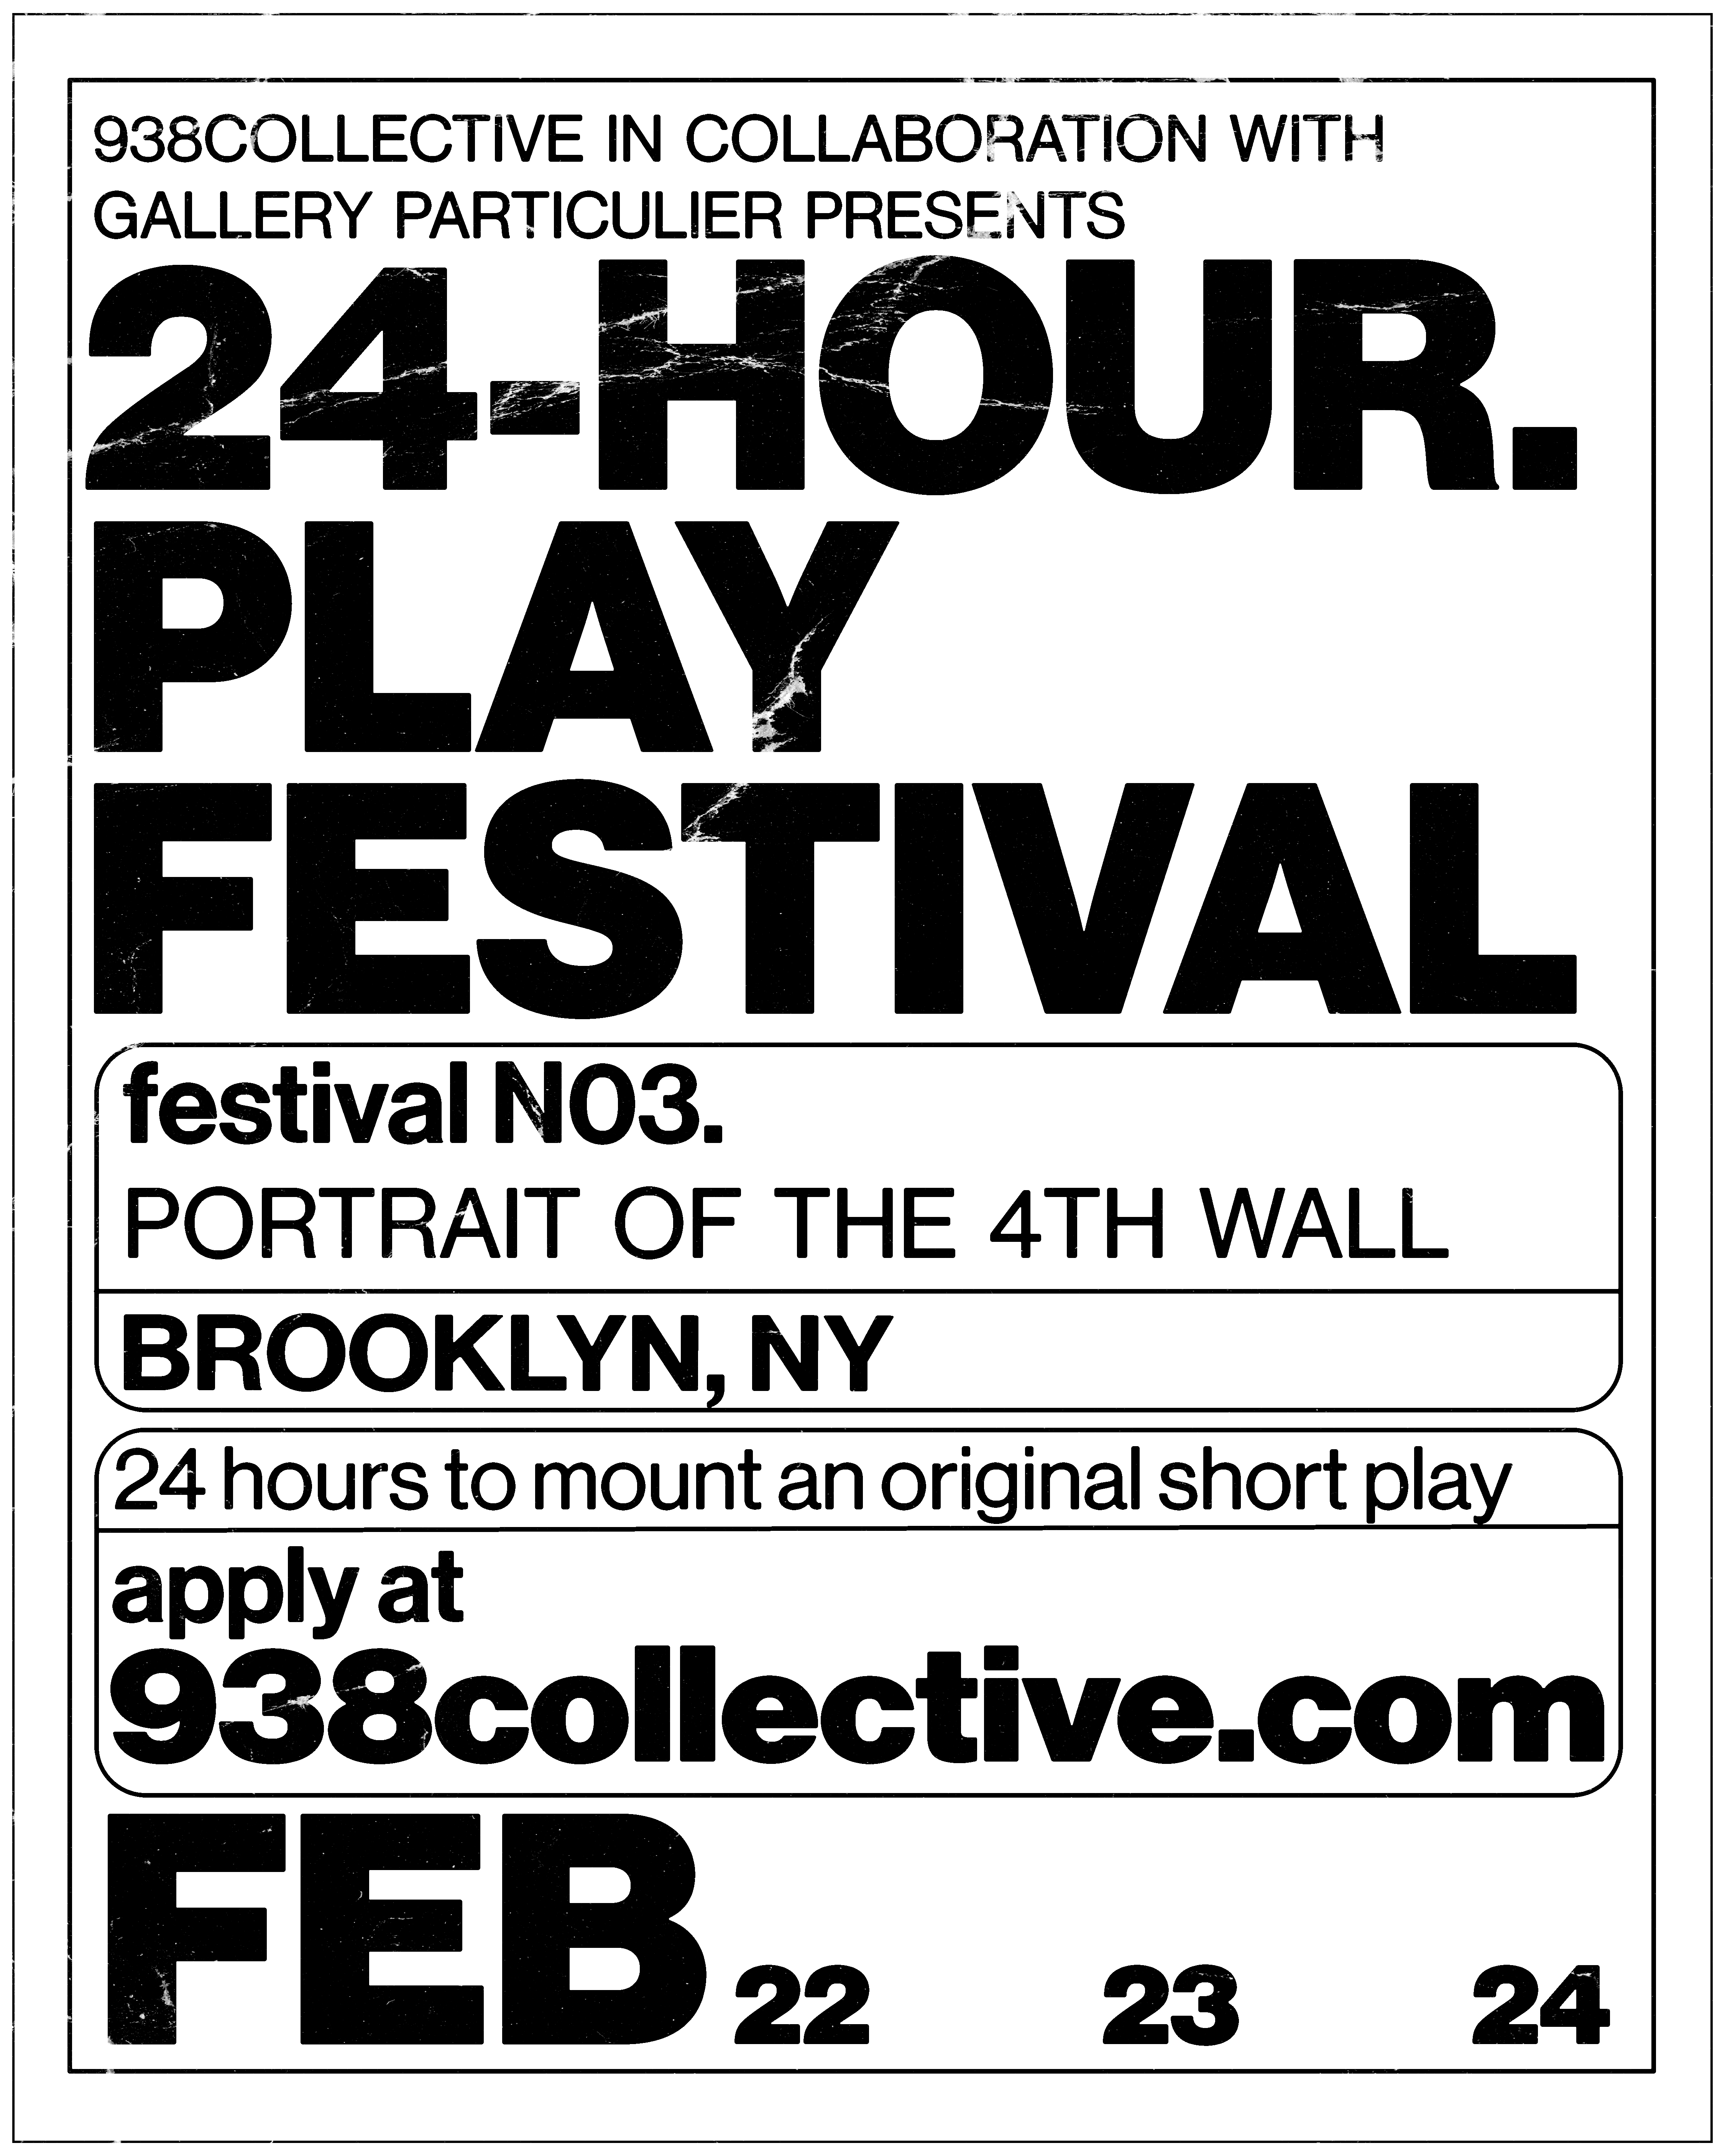 938collective’s 24-Hour Play Festival